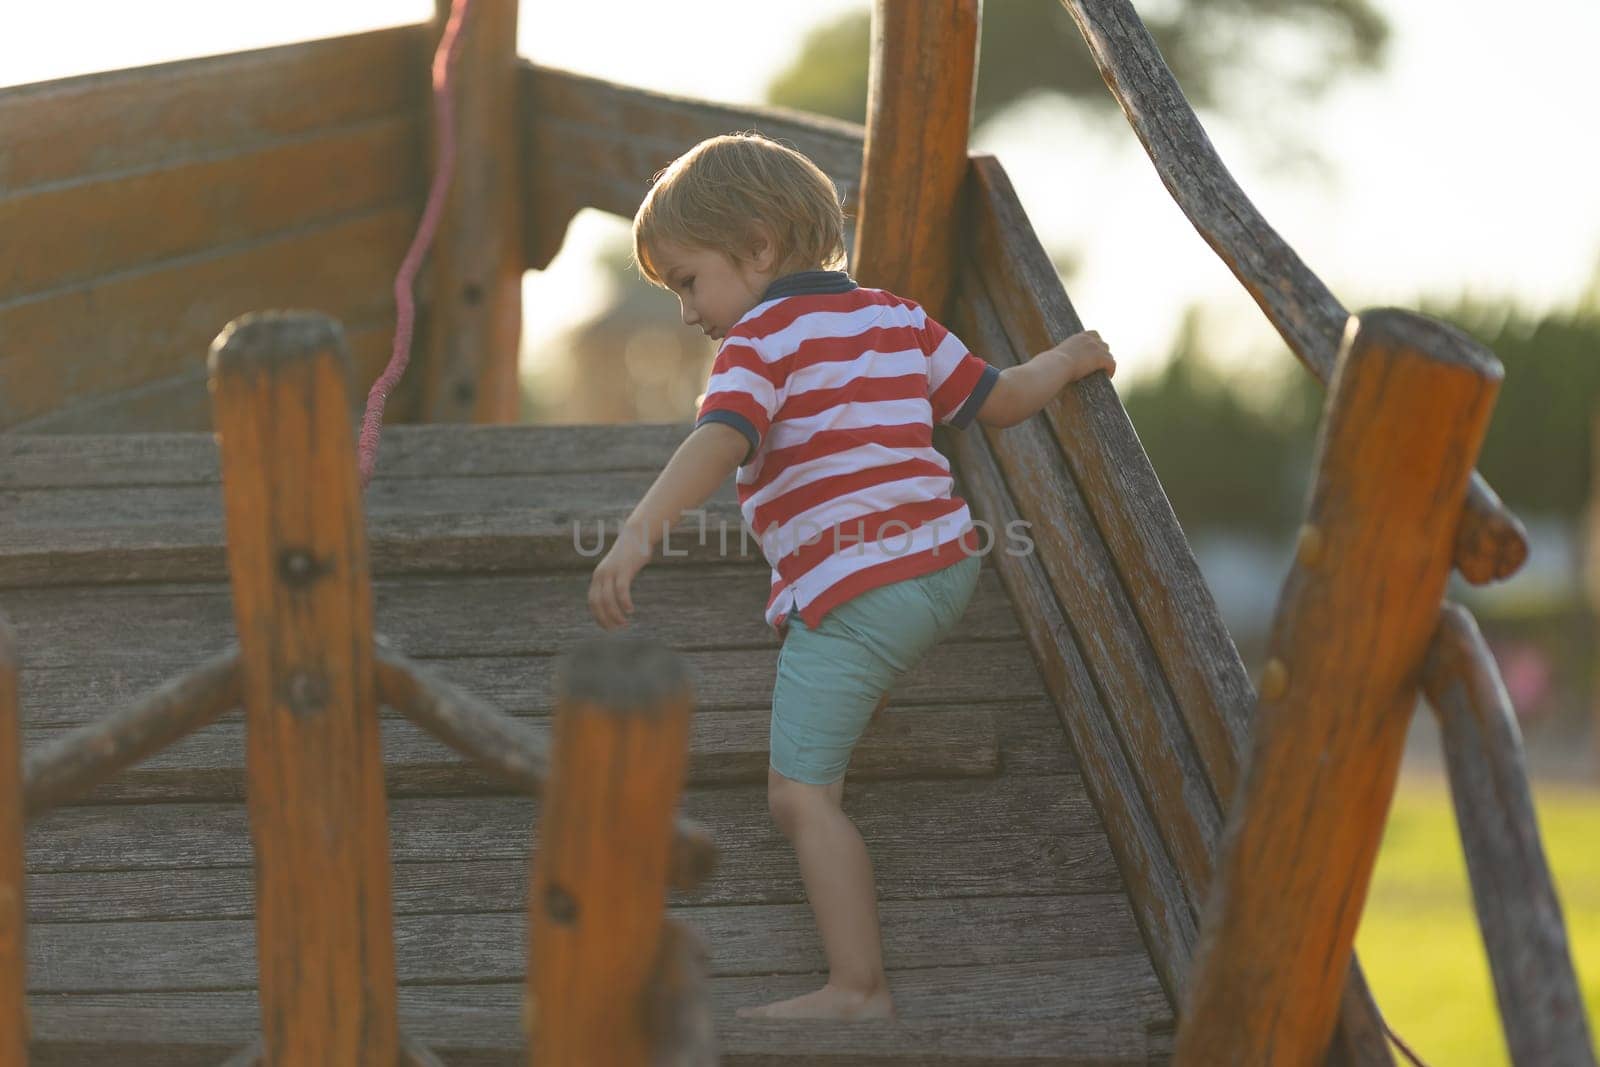 Little cute boy climbing up wooden structure on playground. Mid shot